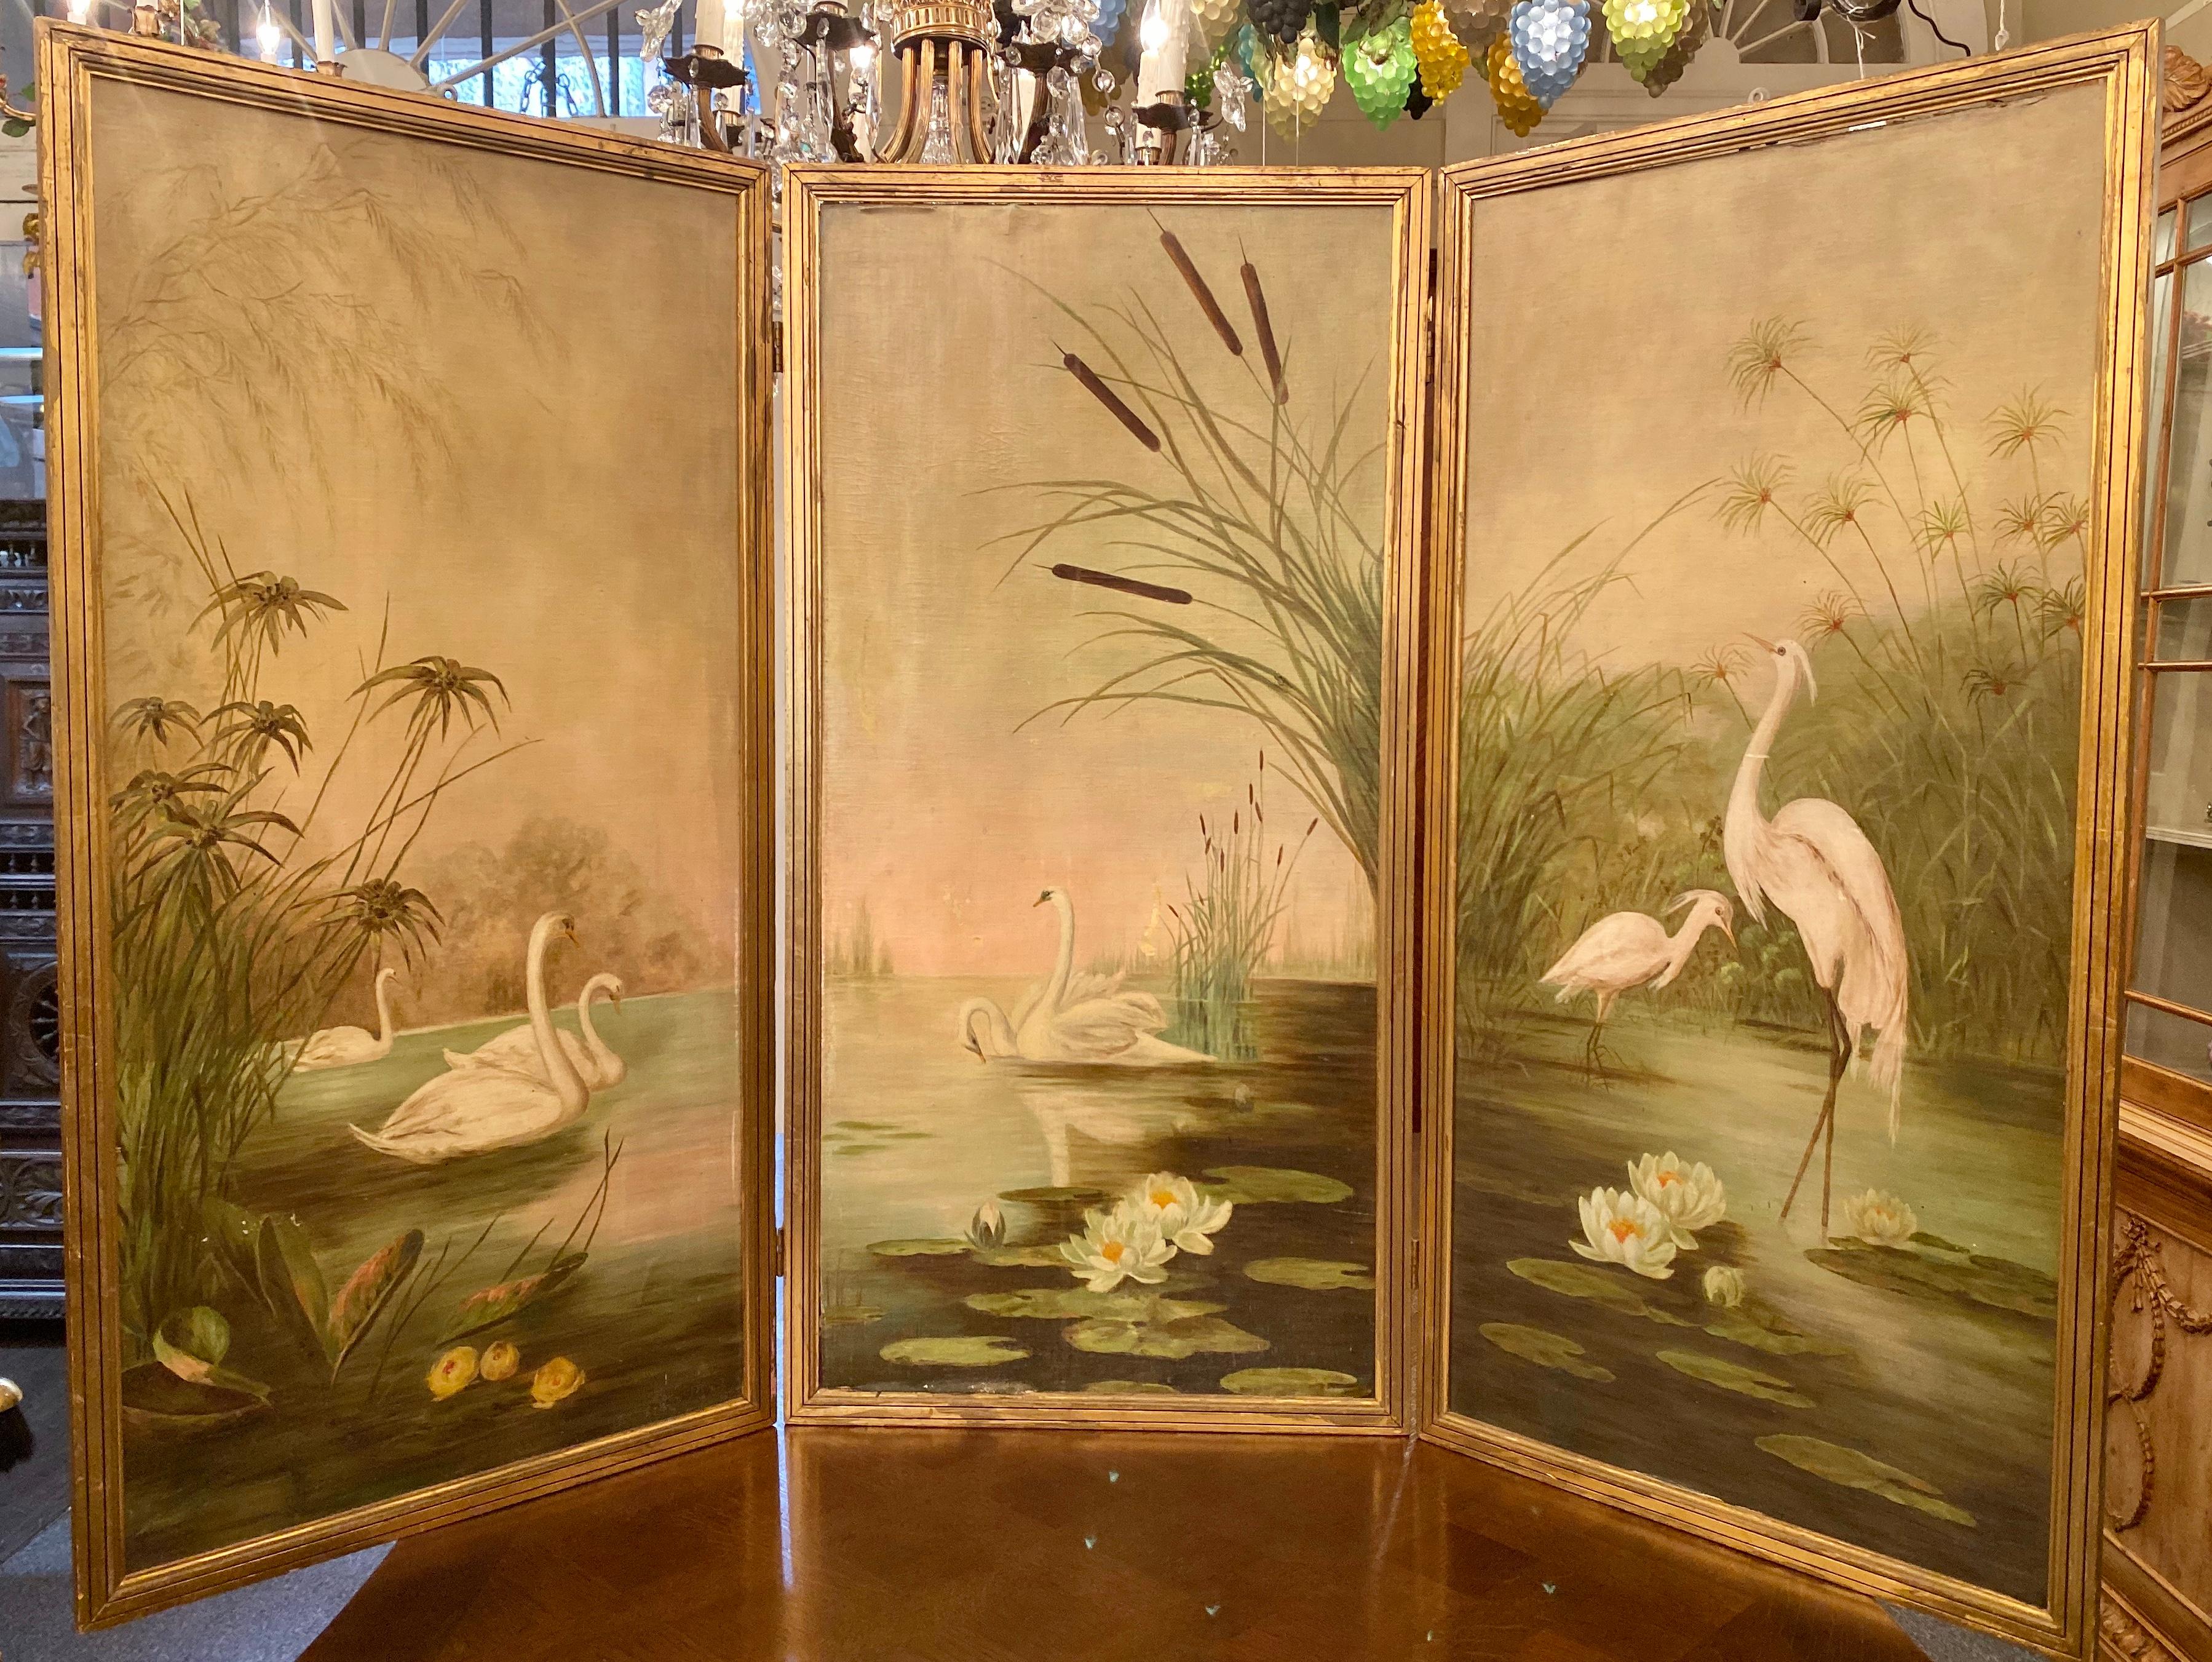 1920s-1930s three paneled screen, aesthetics movement, oil on canvas. Beautiful oil painting of swans and egrets featuring cattails and palmetto plants.
Each panel is 21